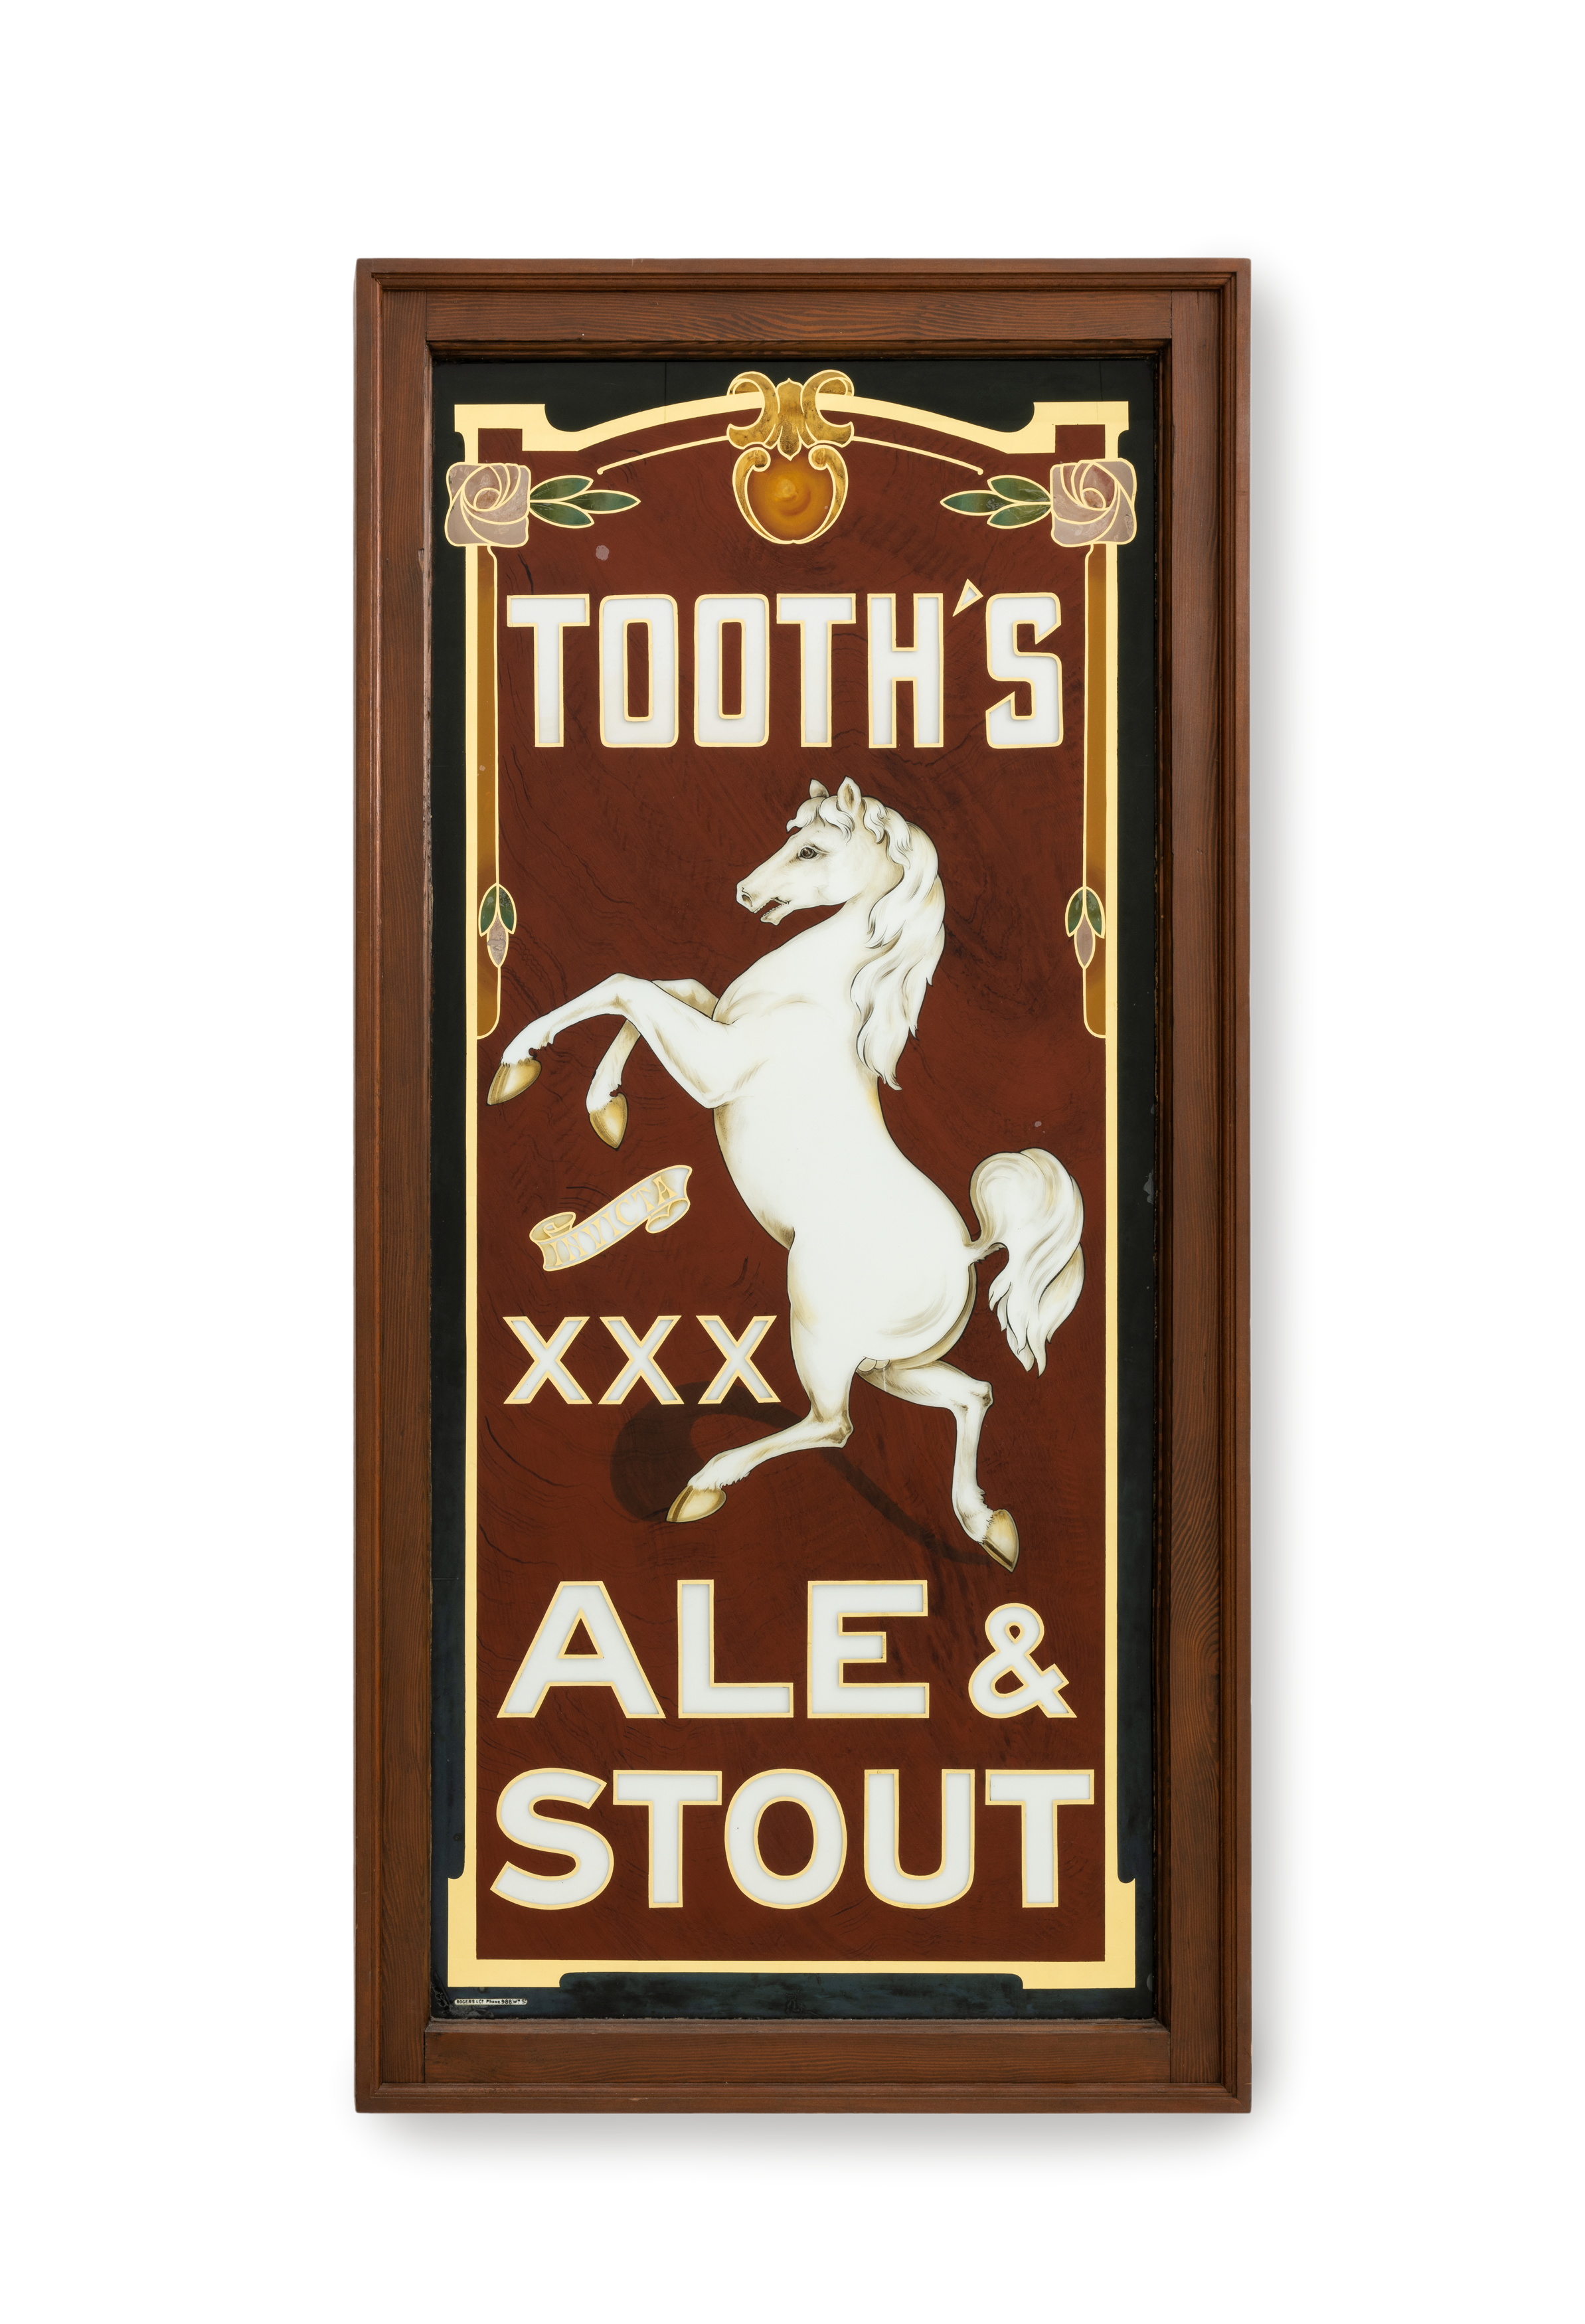 Tooth and Co advertising sign